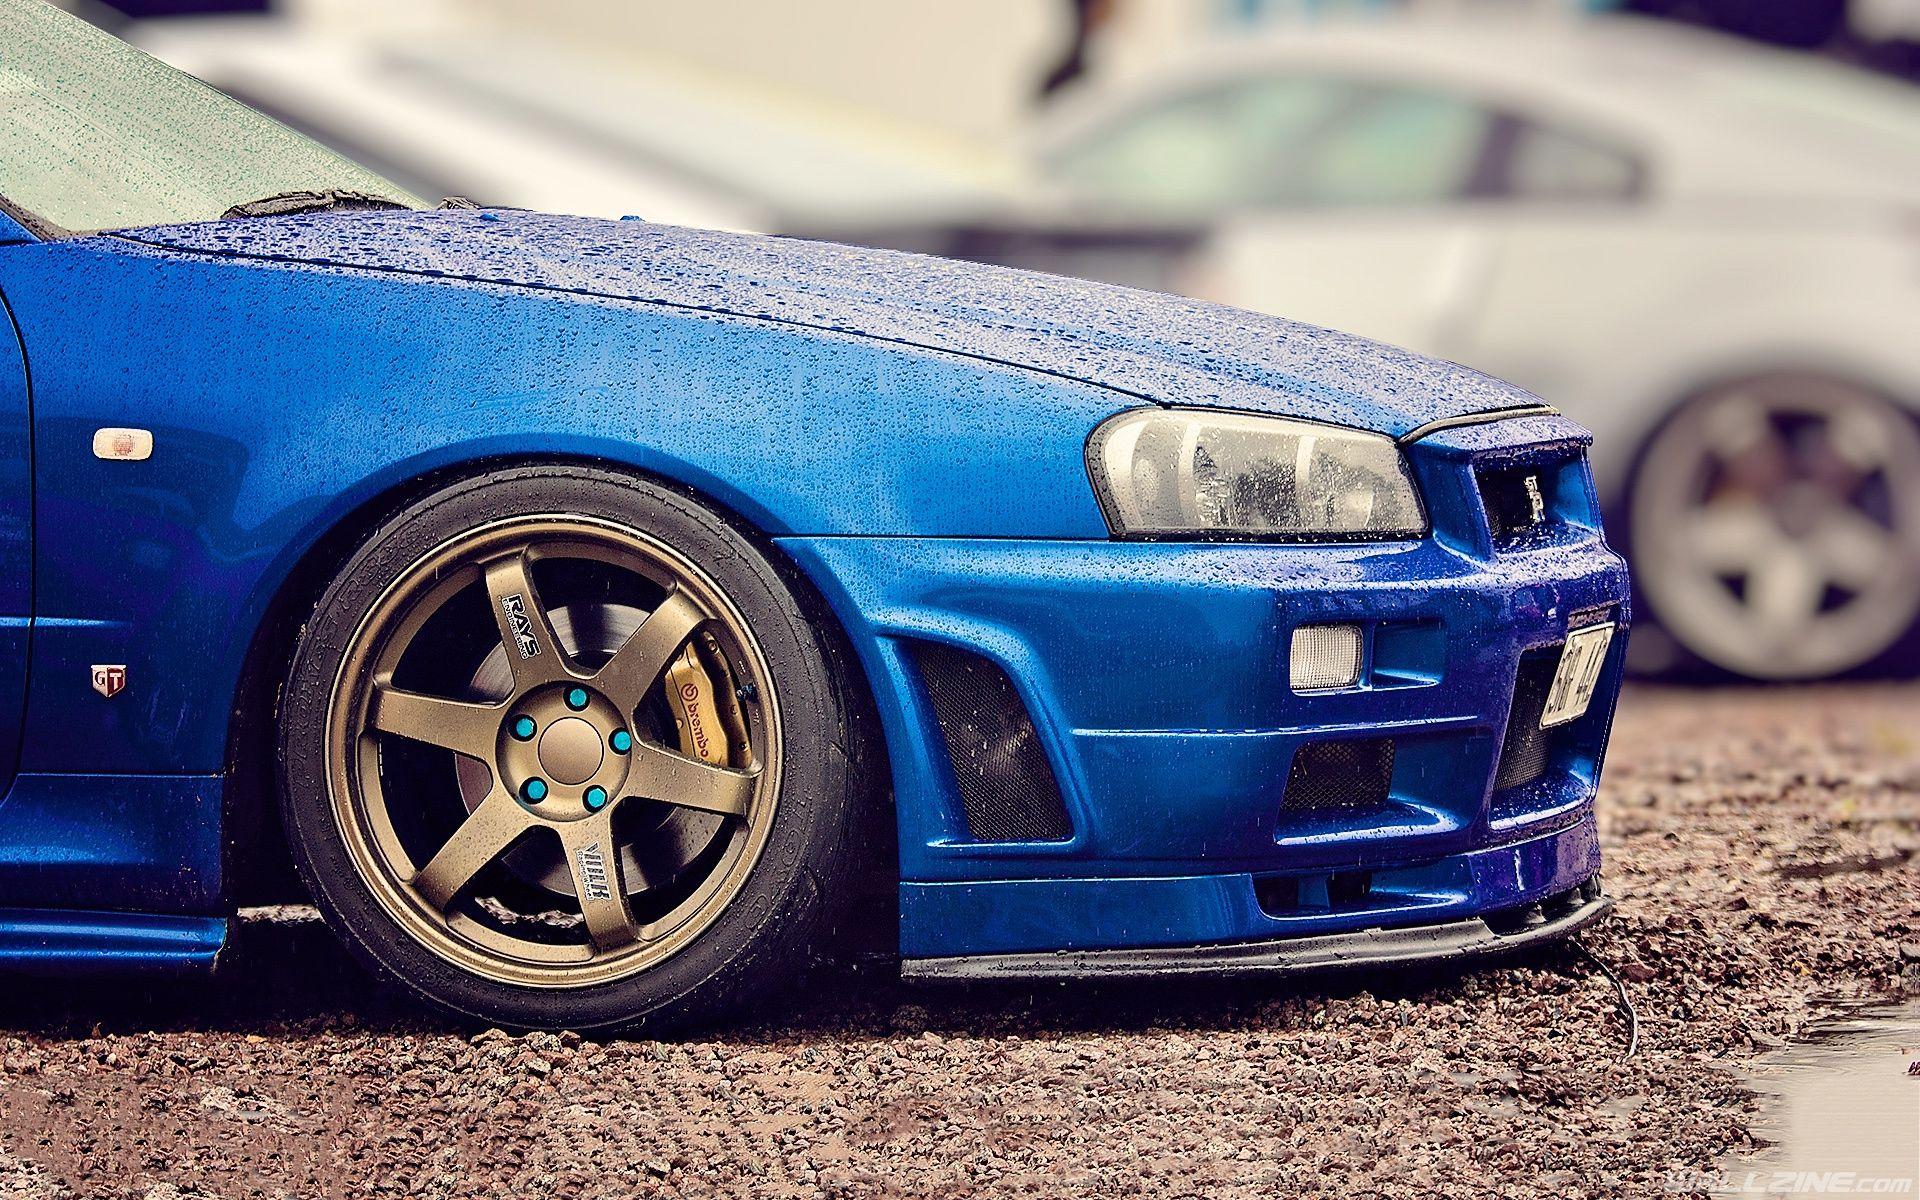 Skyline R34 Wallpapers Top Free Skyline R34 Backgrounds Wallpaperaccess